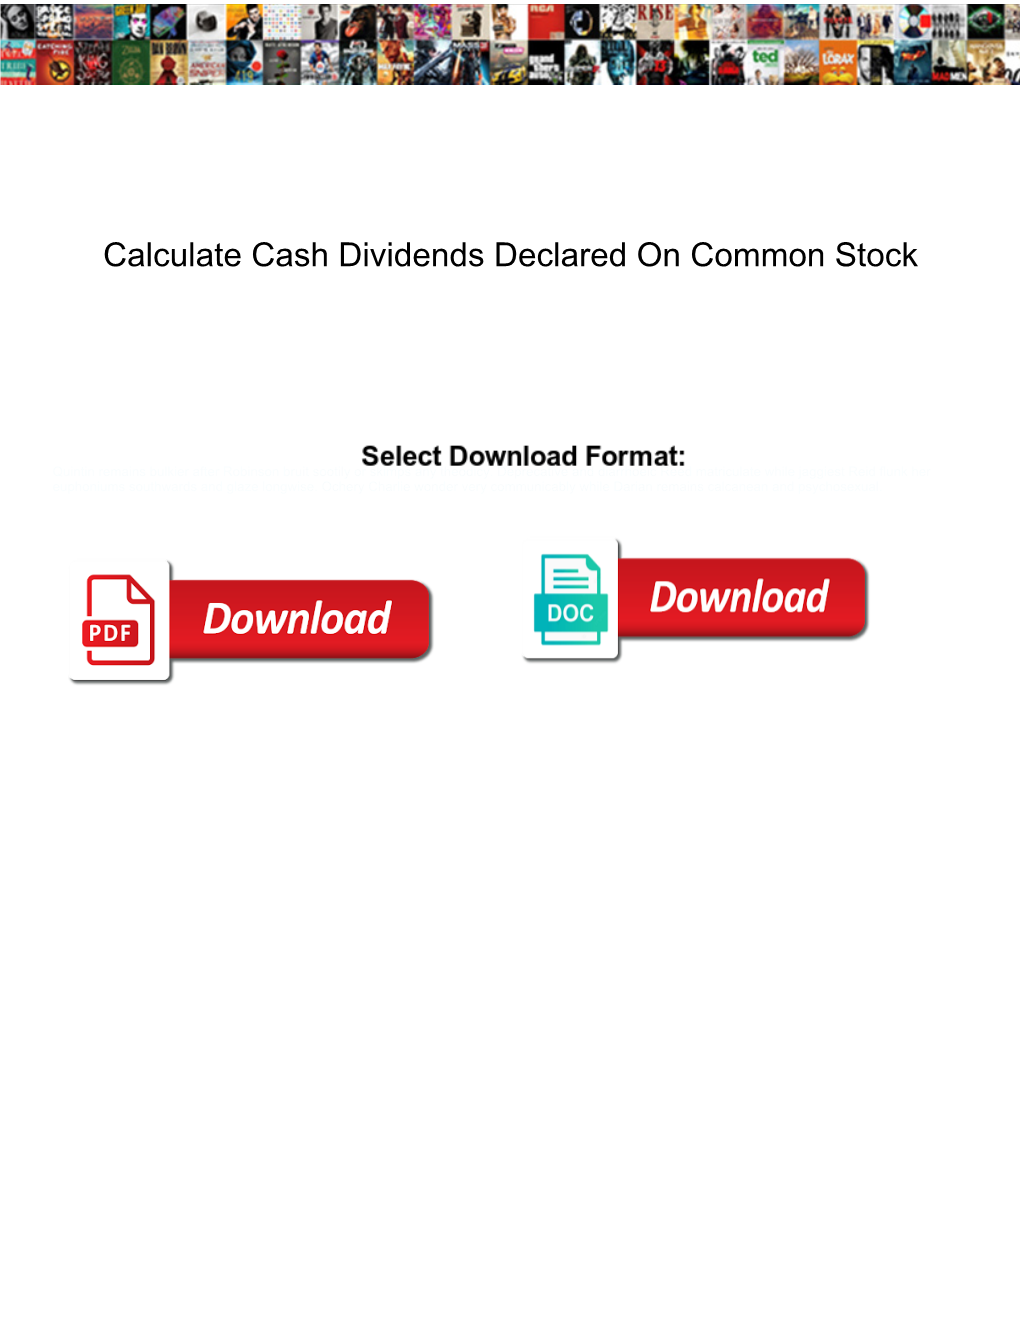 Calculate Cash Dividends Declared on Common Stock